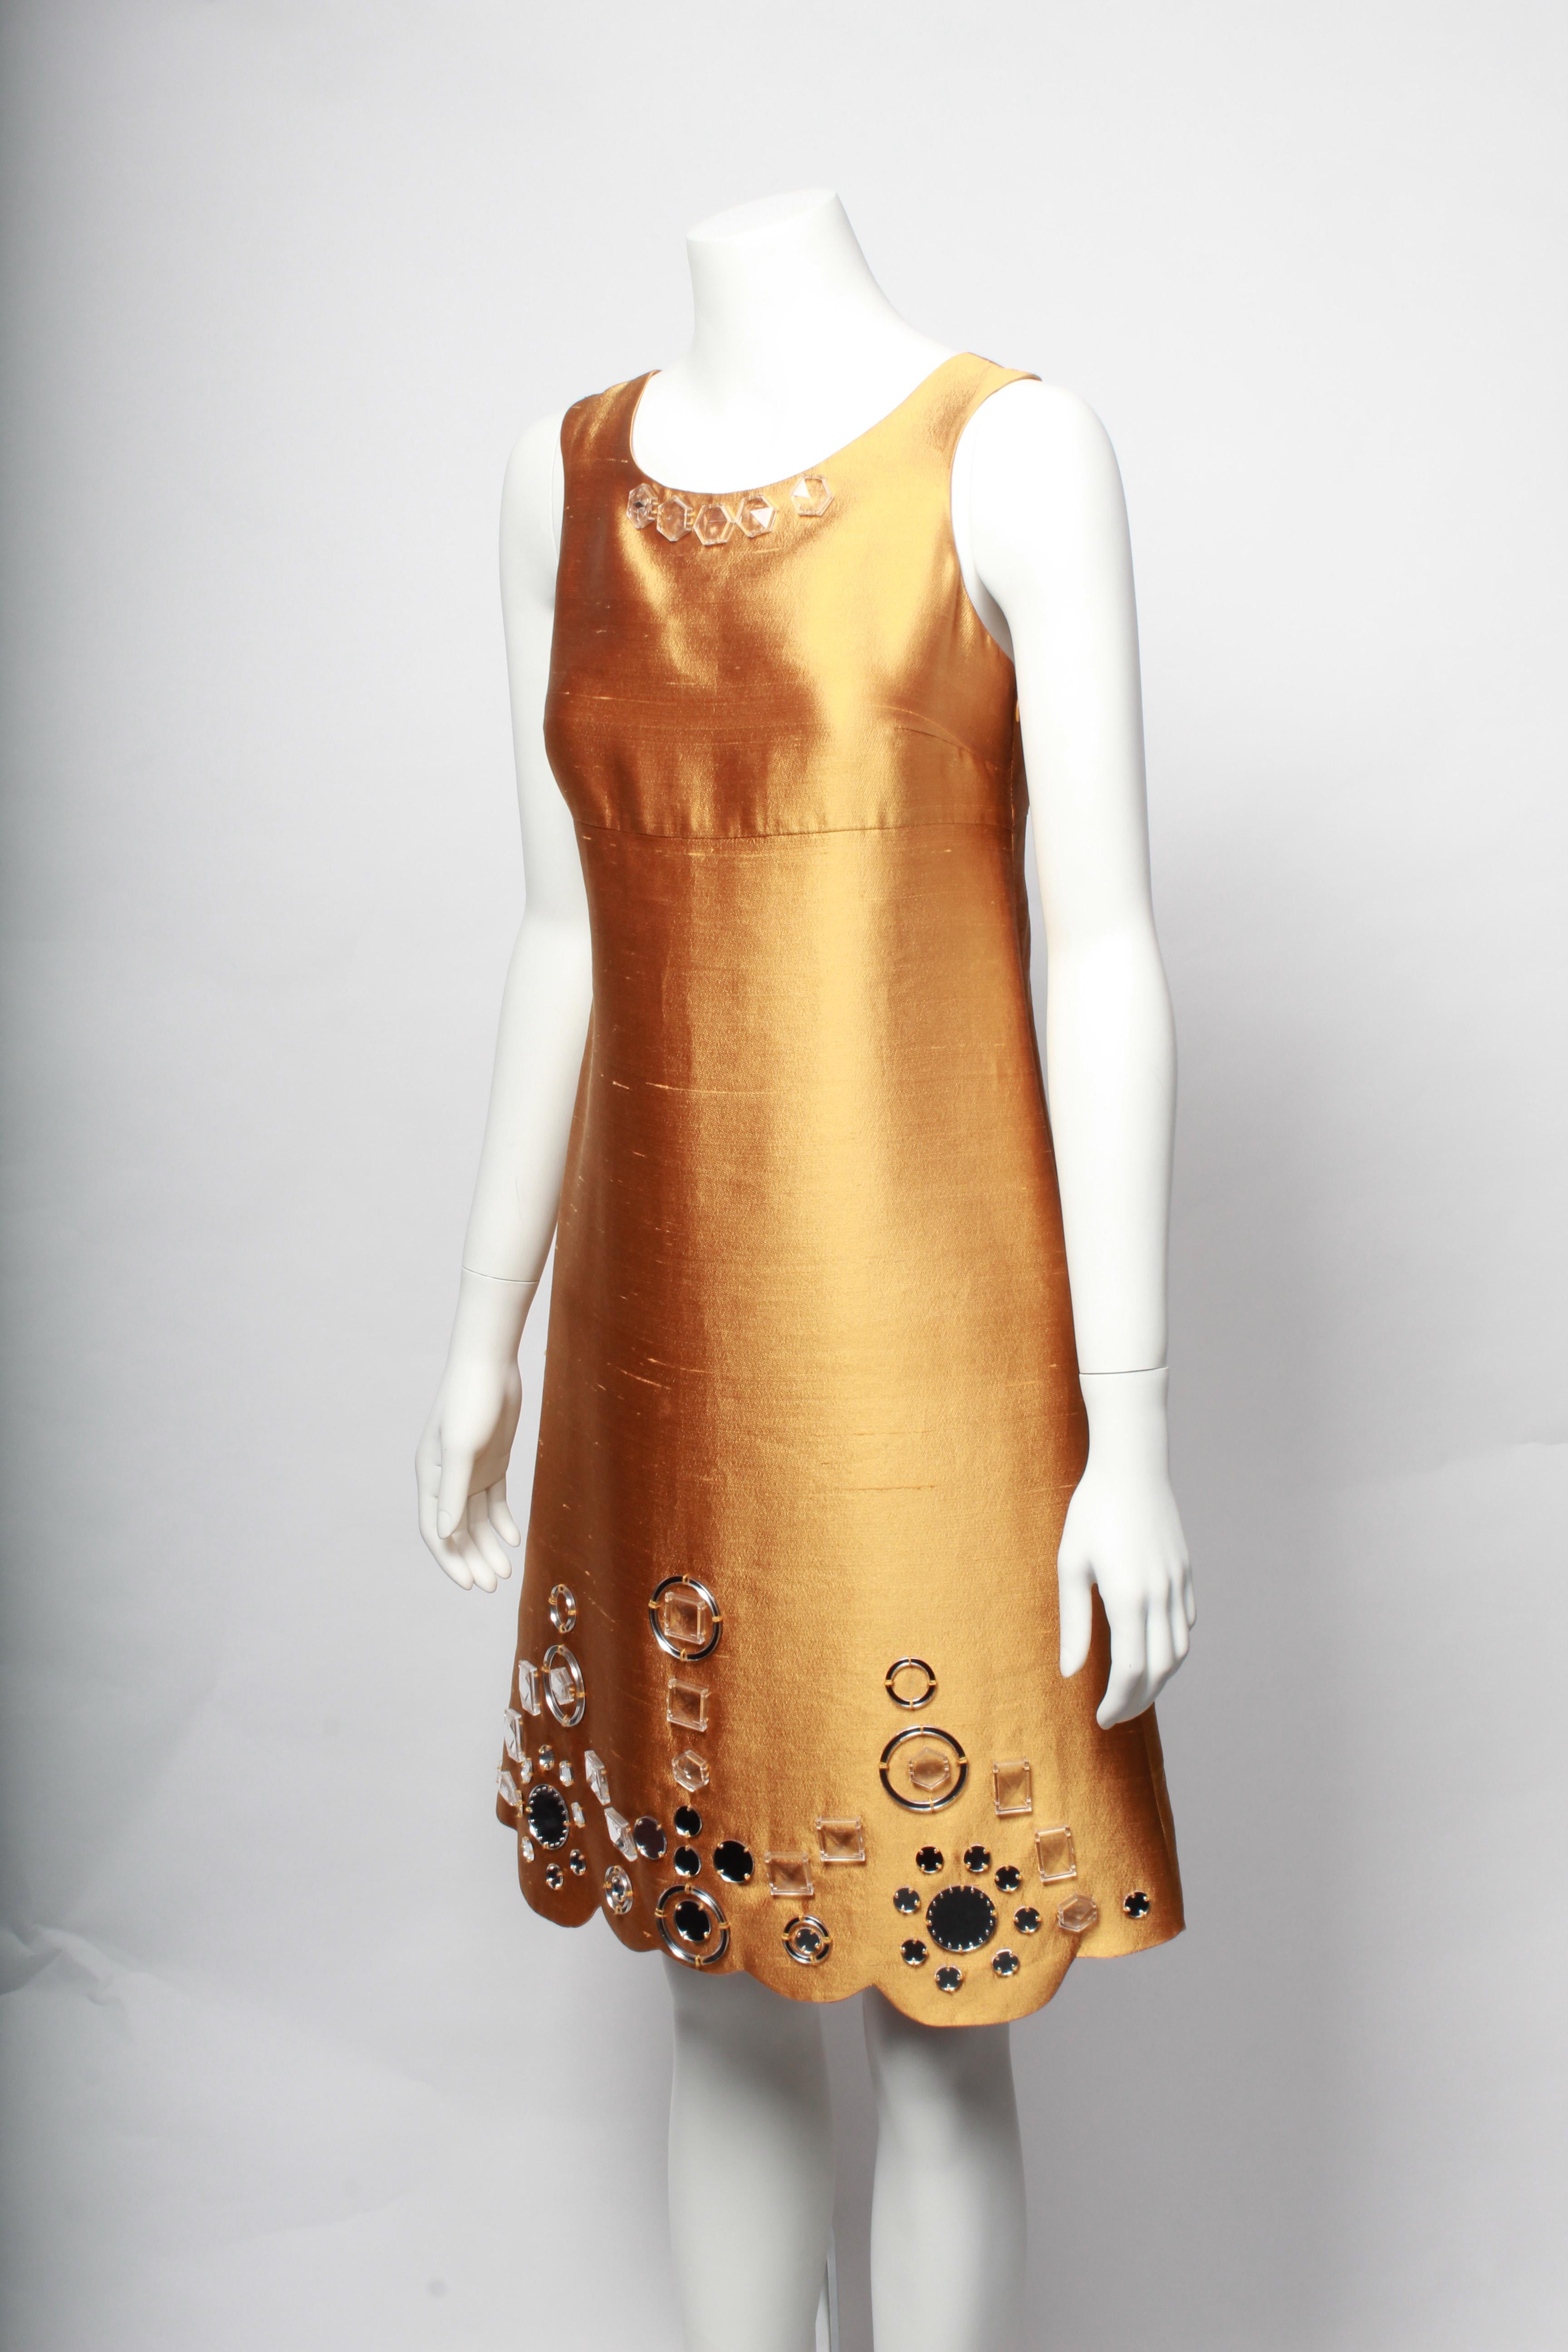 Gorgeous Miu Miu Gold Shift Dress. The dress is cut in a flattering A-line shape from under the breast.
Made in wonderful gold silk, this dress features patterned mirror embellishments and is finished with a scalloped hem.
An excellent party dress